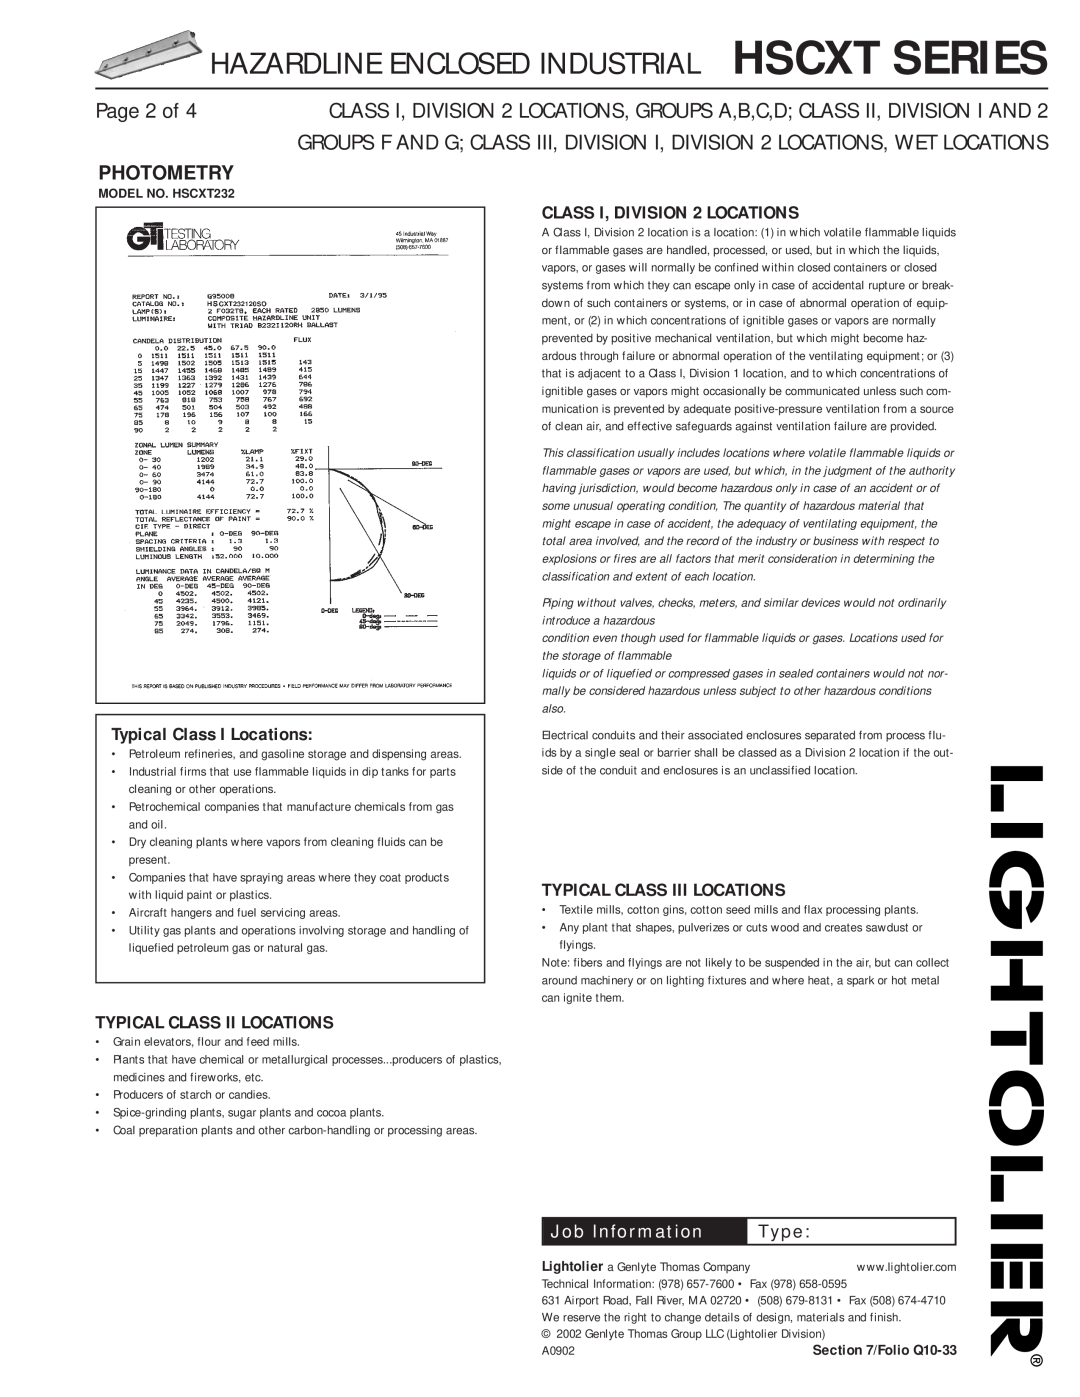 Lightolier HSCXT Series Hazardline Enclosed Industrial Hscxt Series, Page 2 of, Photometry, Typical Class I Locations 